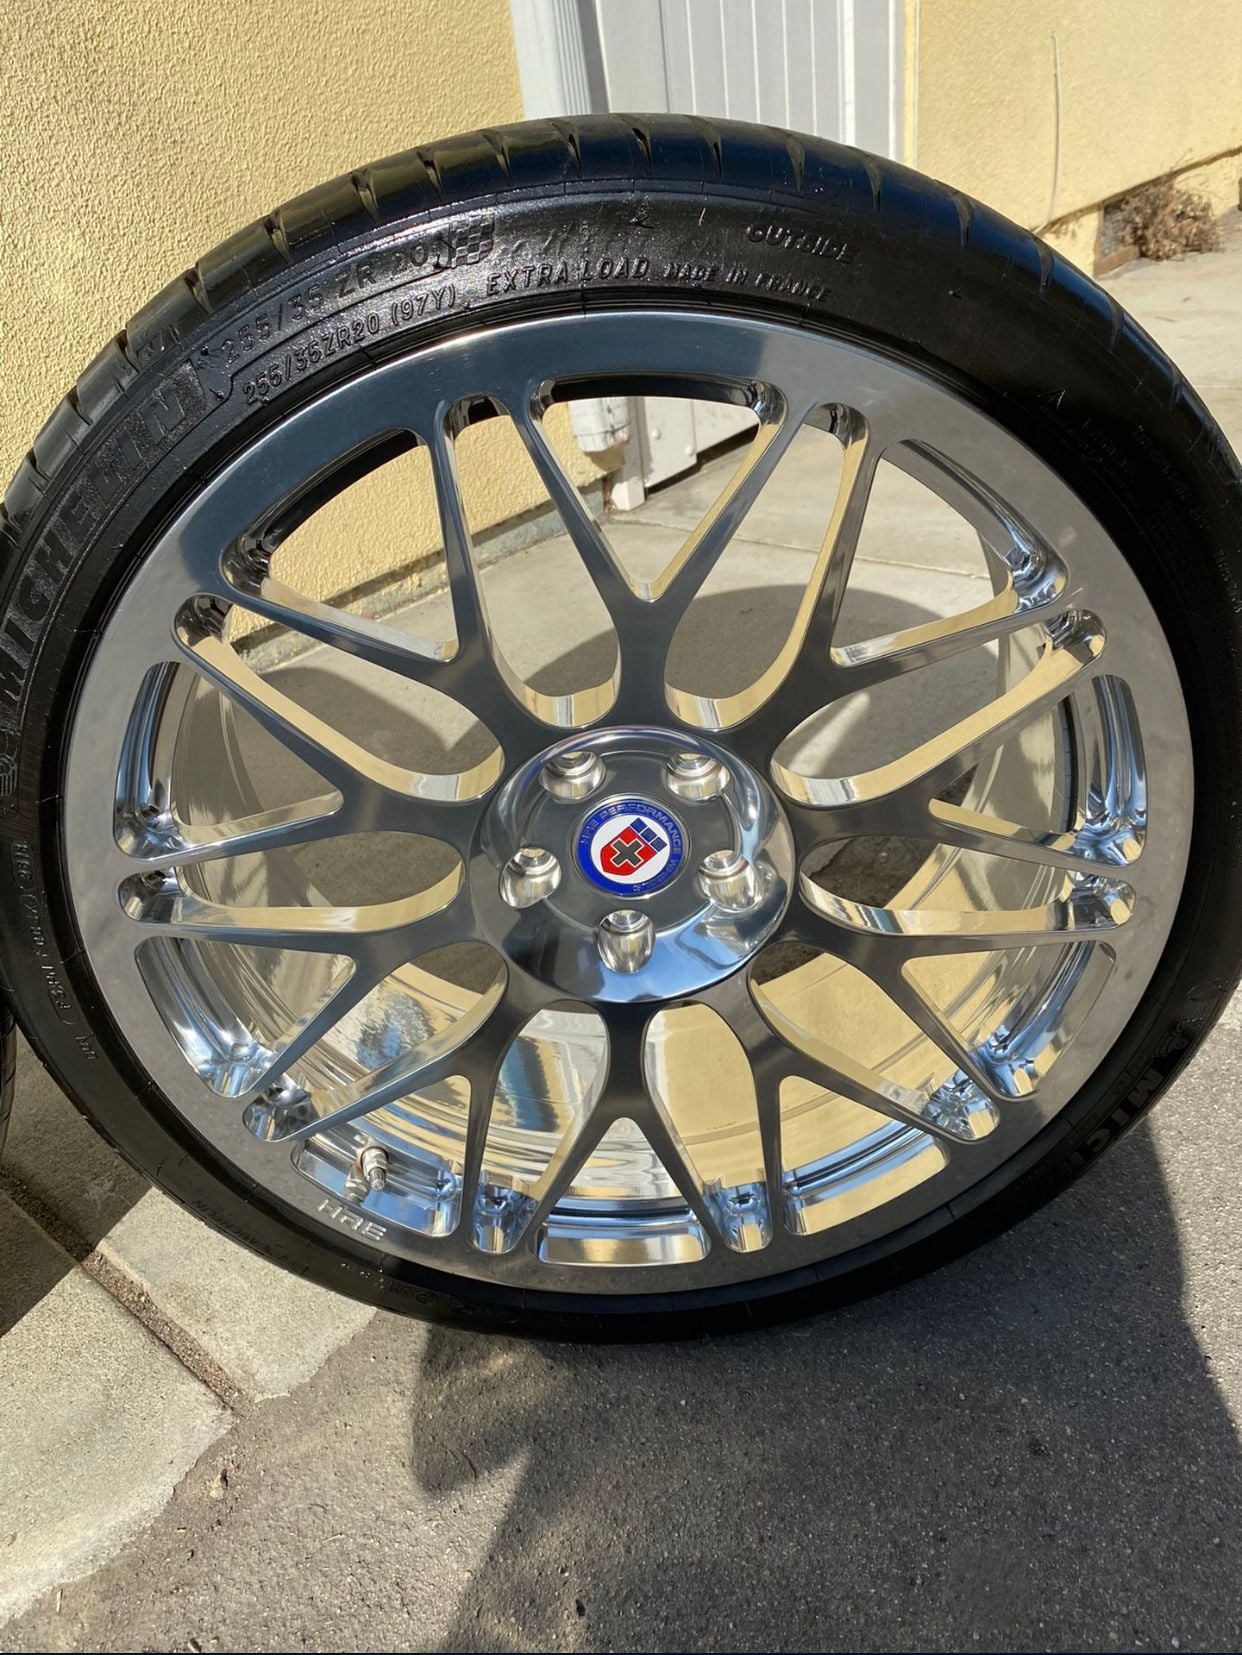 Wheels and Tires/Axles - FS: HRE 300M - Used - 0  All Models - Riverside, CA 92504, United States